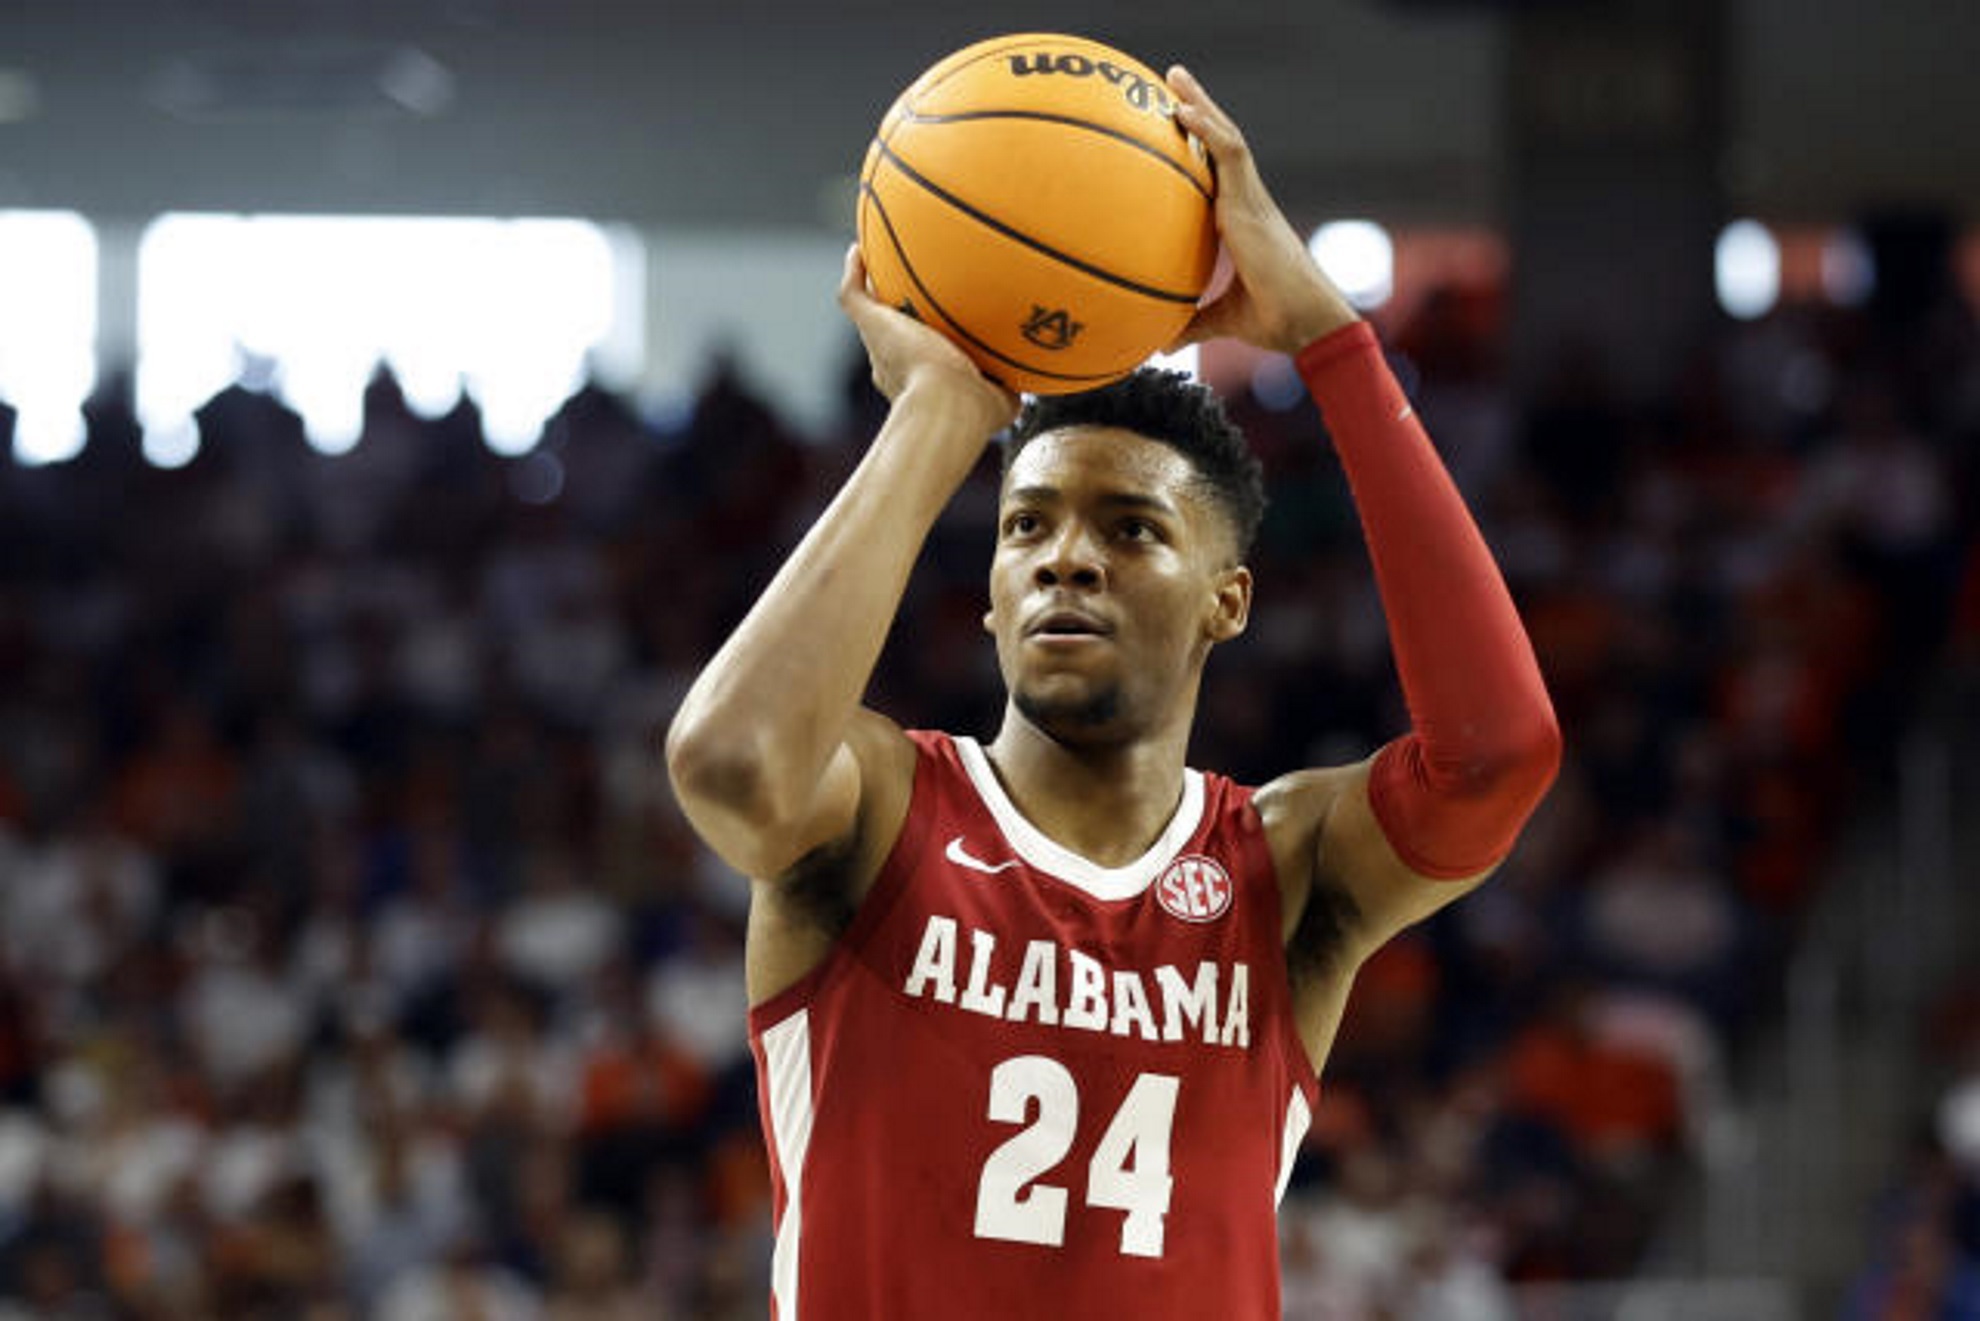 Alabama's Miller stars amid alleged role in fatal shooting